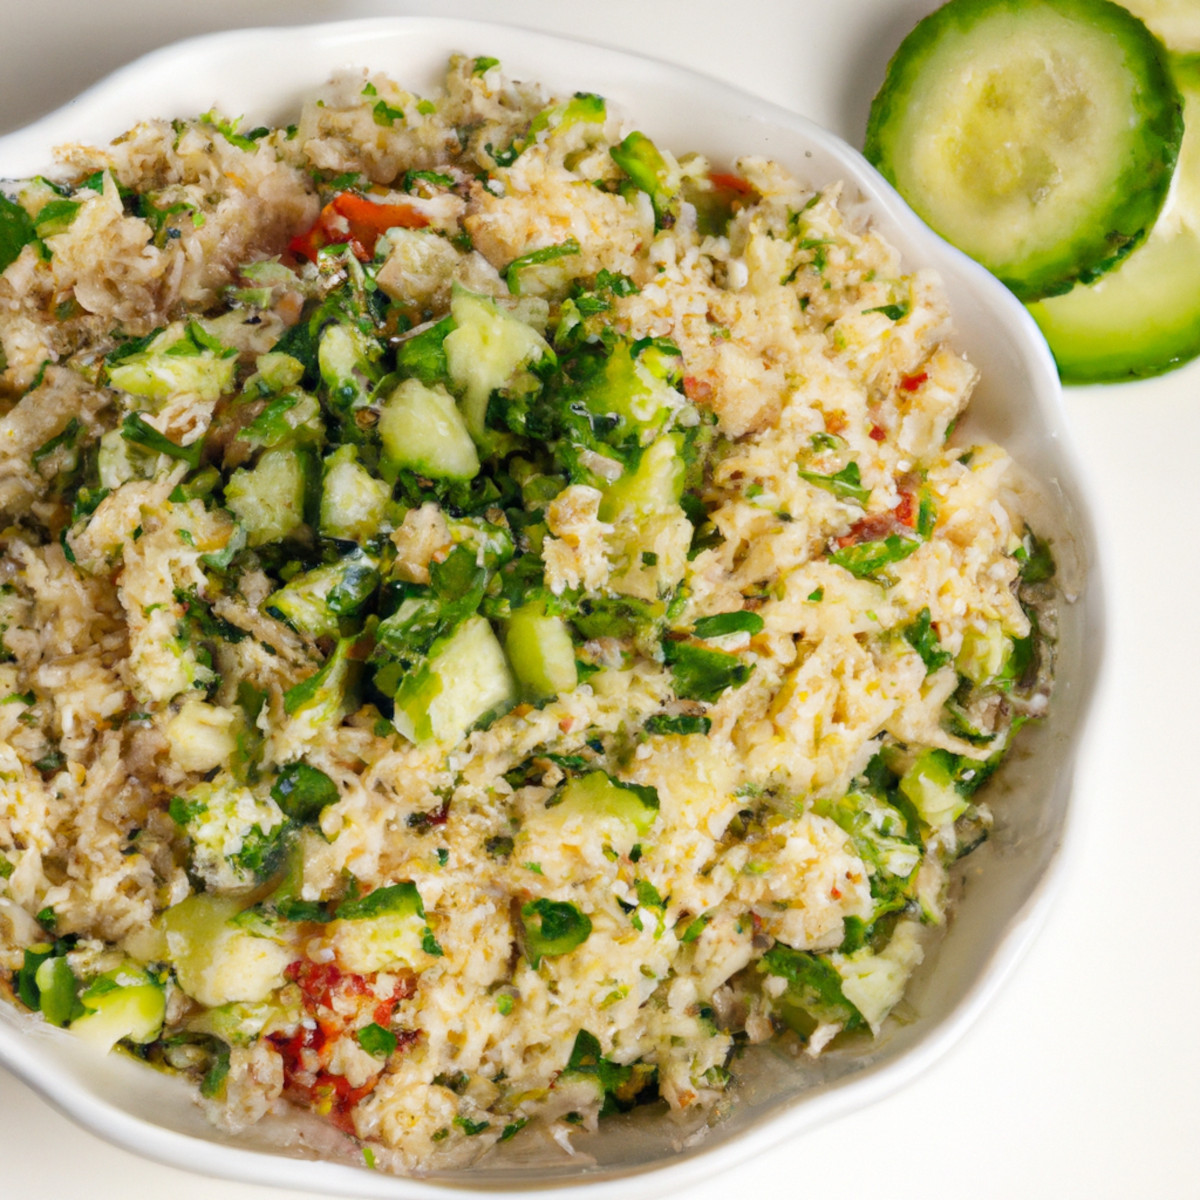 tabbouleh with cucumber and bulgar wheat